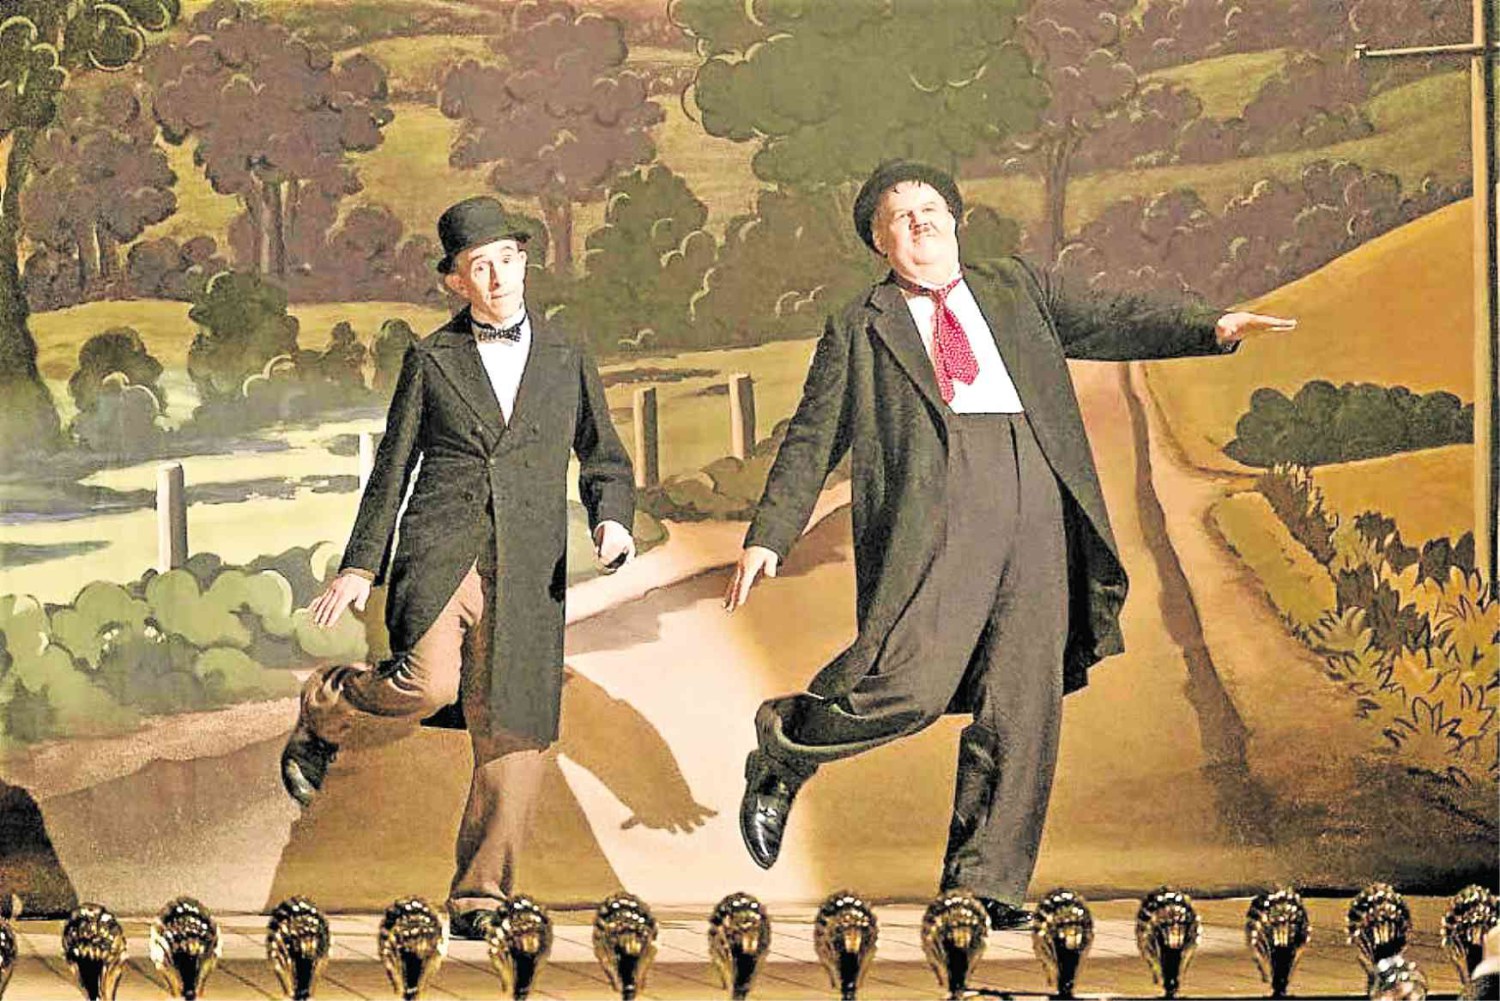 Coogan (left) and John C. Reilly as Stan Laurel and Oliver Hardy, respectively, in Jon S. Baird’s “Stan & Ollie.”—SONY PICTURES CLASSICS